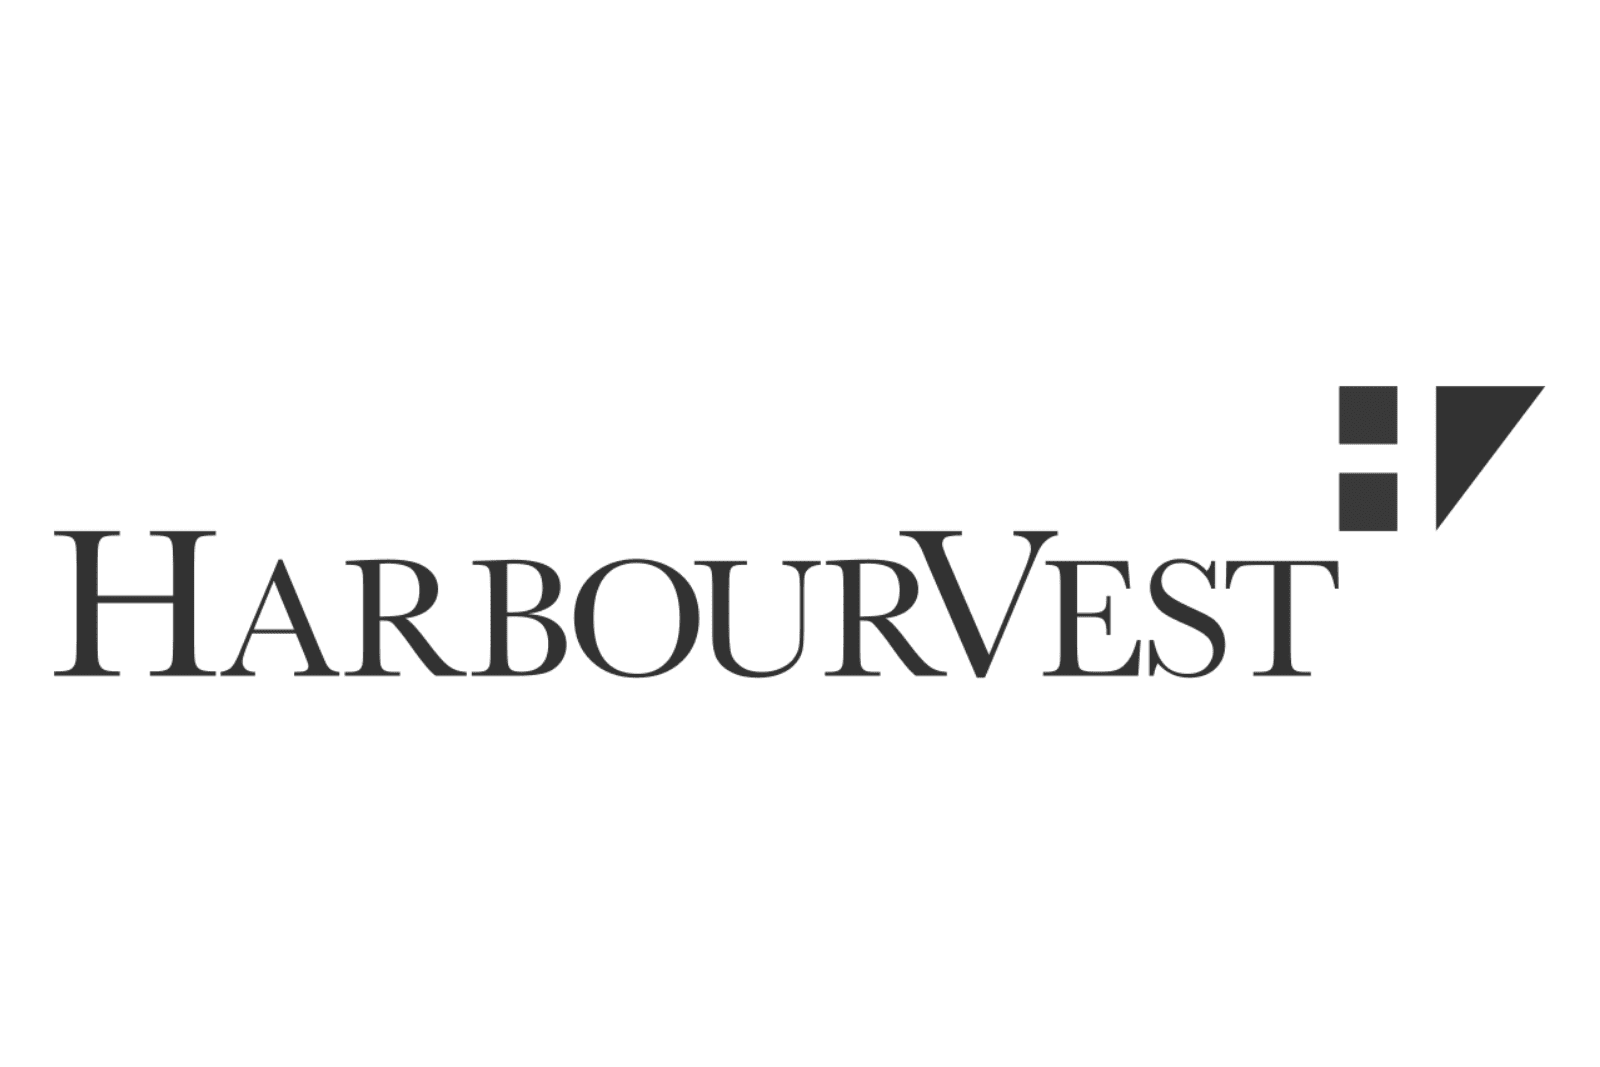 Harbourvest is an official corporate partner of The Secret Love Project